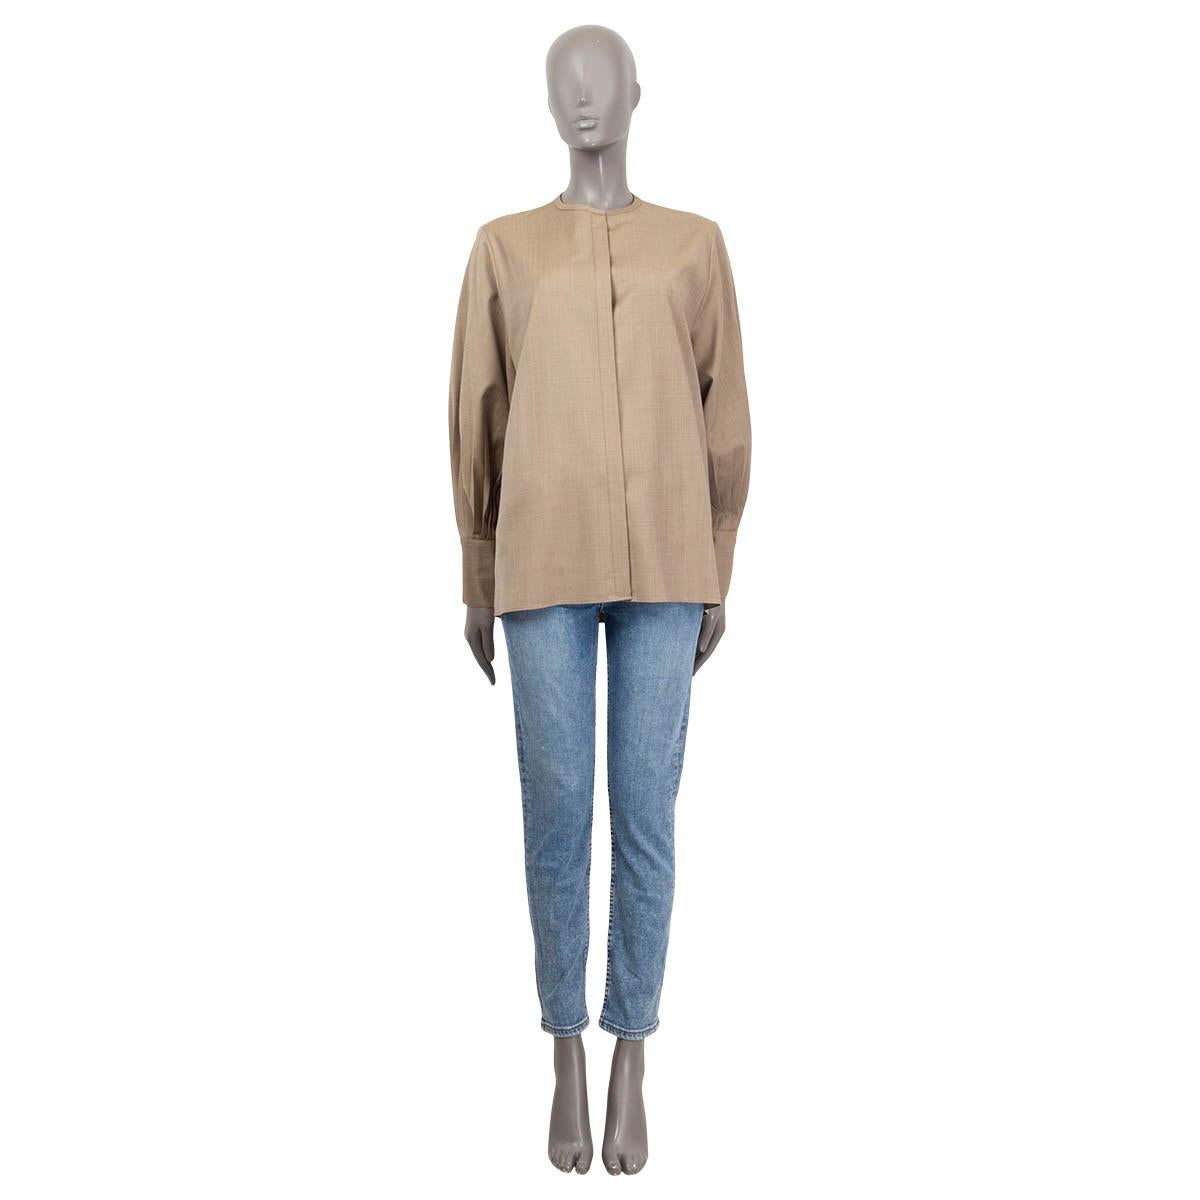 100% authentic The Row long sleeve oversized shirt in khaki virgin wool (100%). Features buttoned and pleated cuffs. Opens with six concealed buttons and a hook on the front. Unlined. Has been worn once and is in virtually new